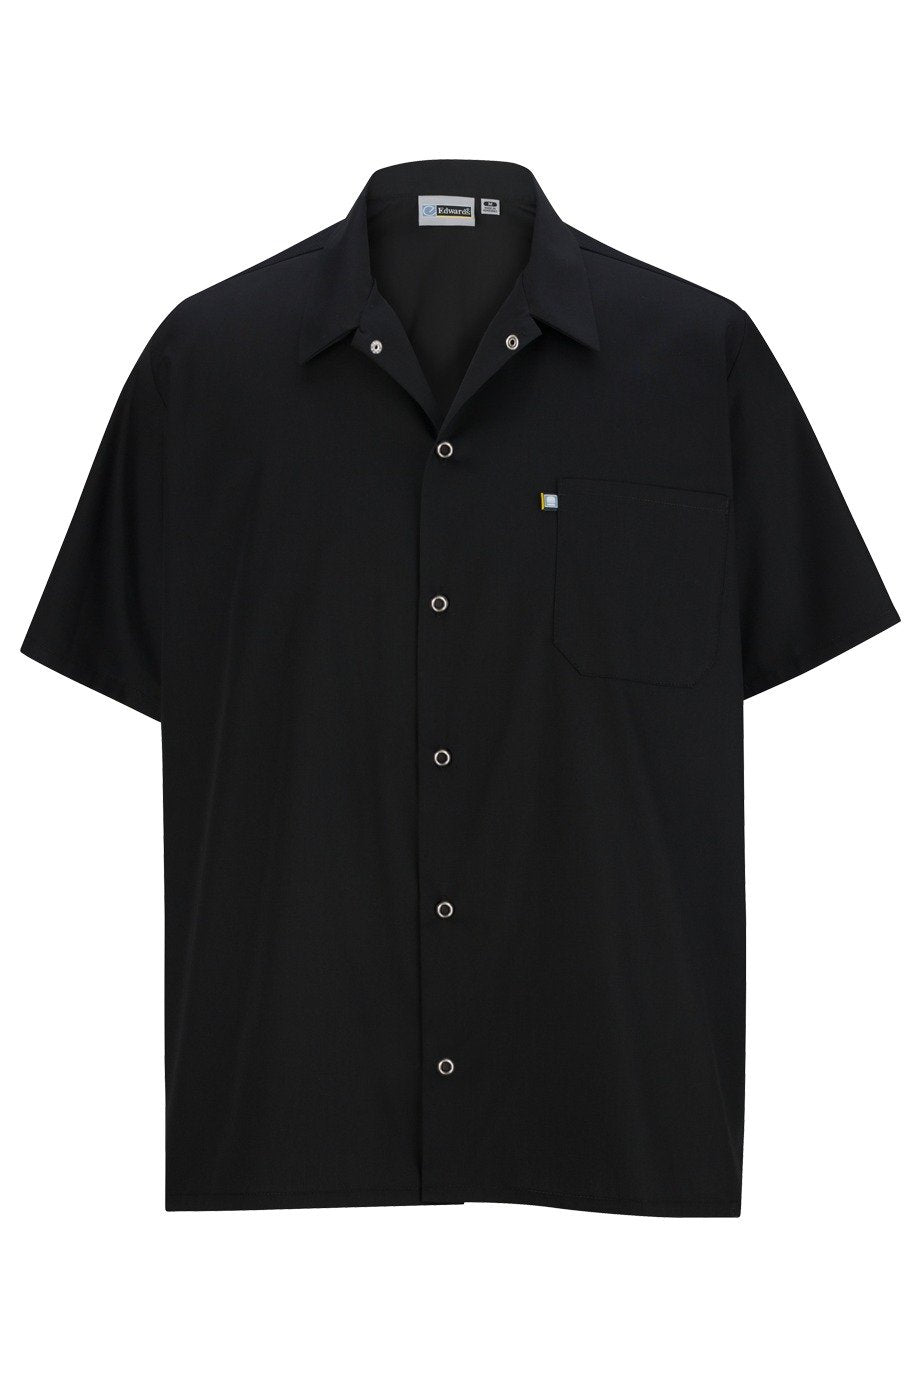 edwards-garment-cook-and-server-shirts